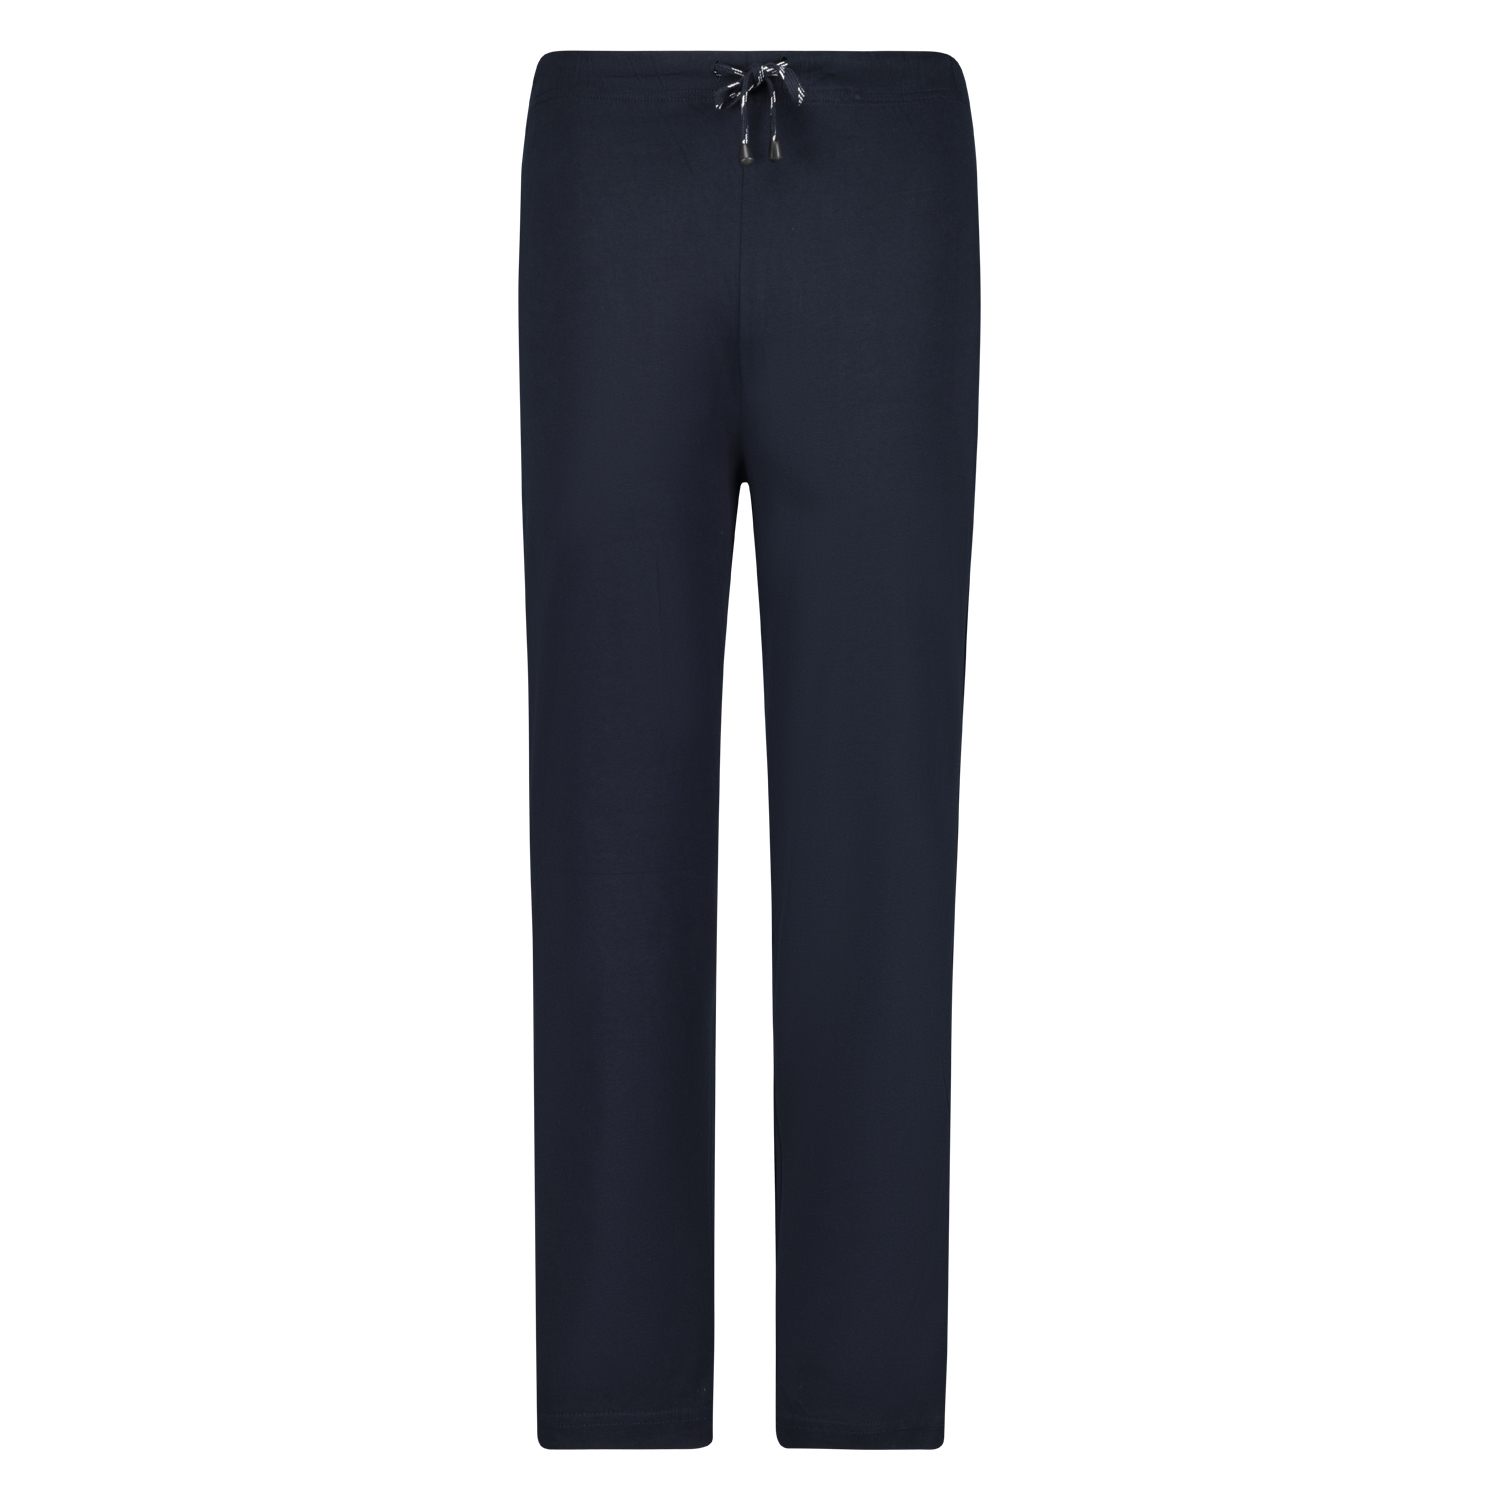 Long pyjama pants in blue by ADAMO in plus sizes up to 10XL and 122